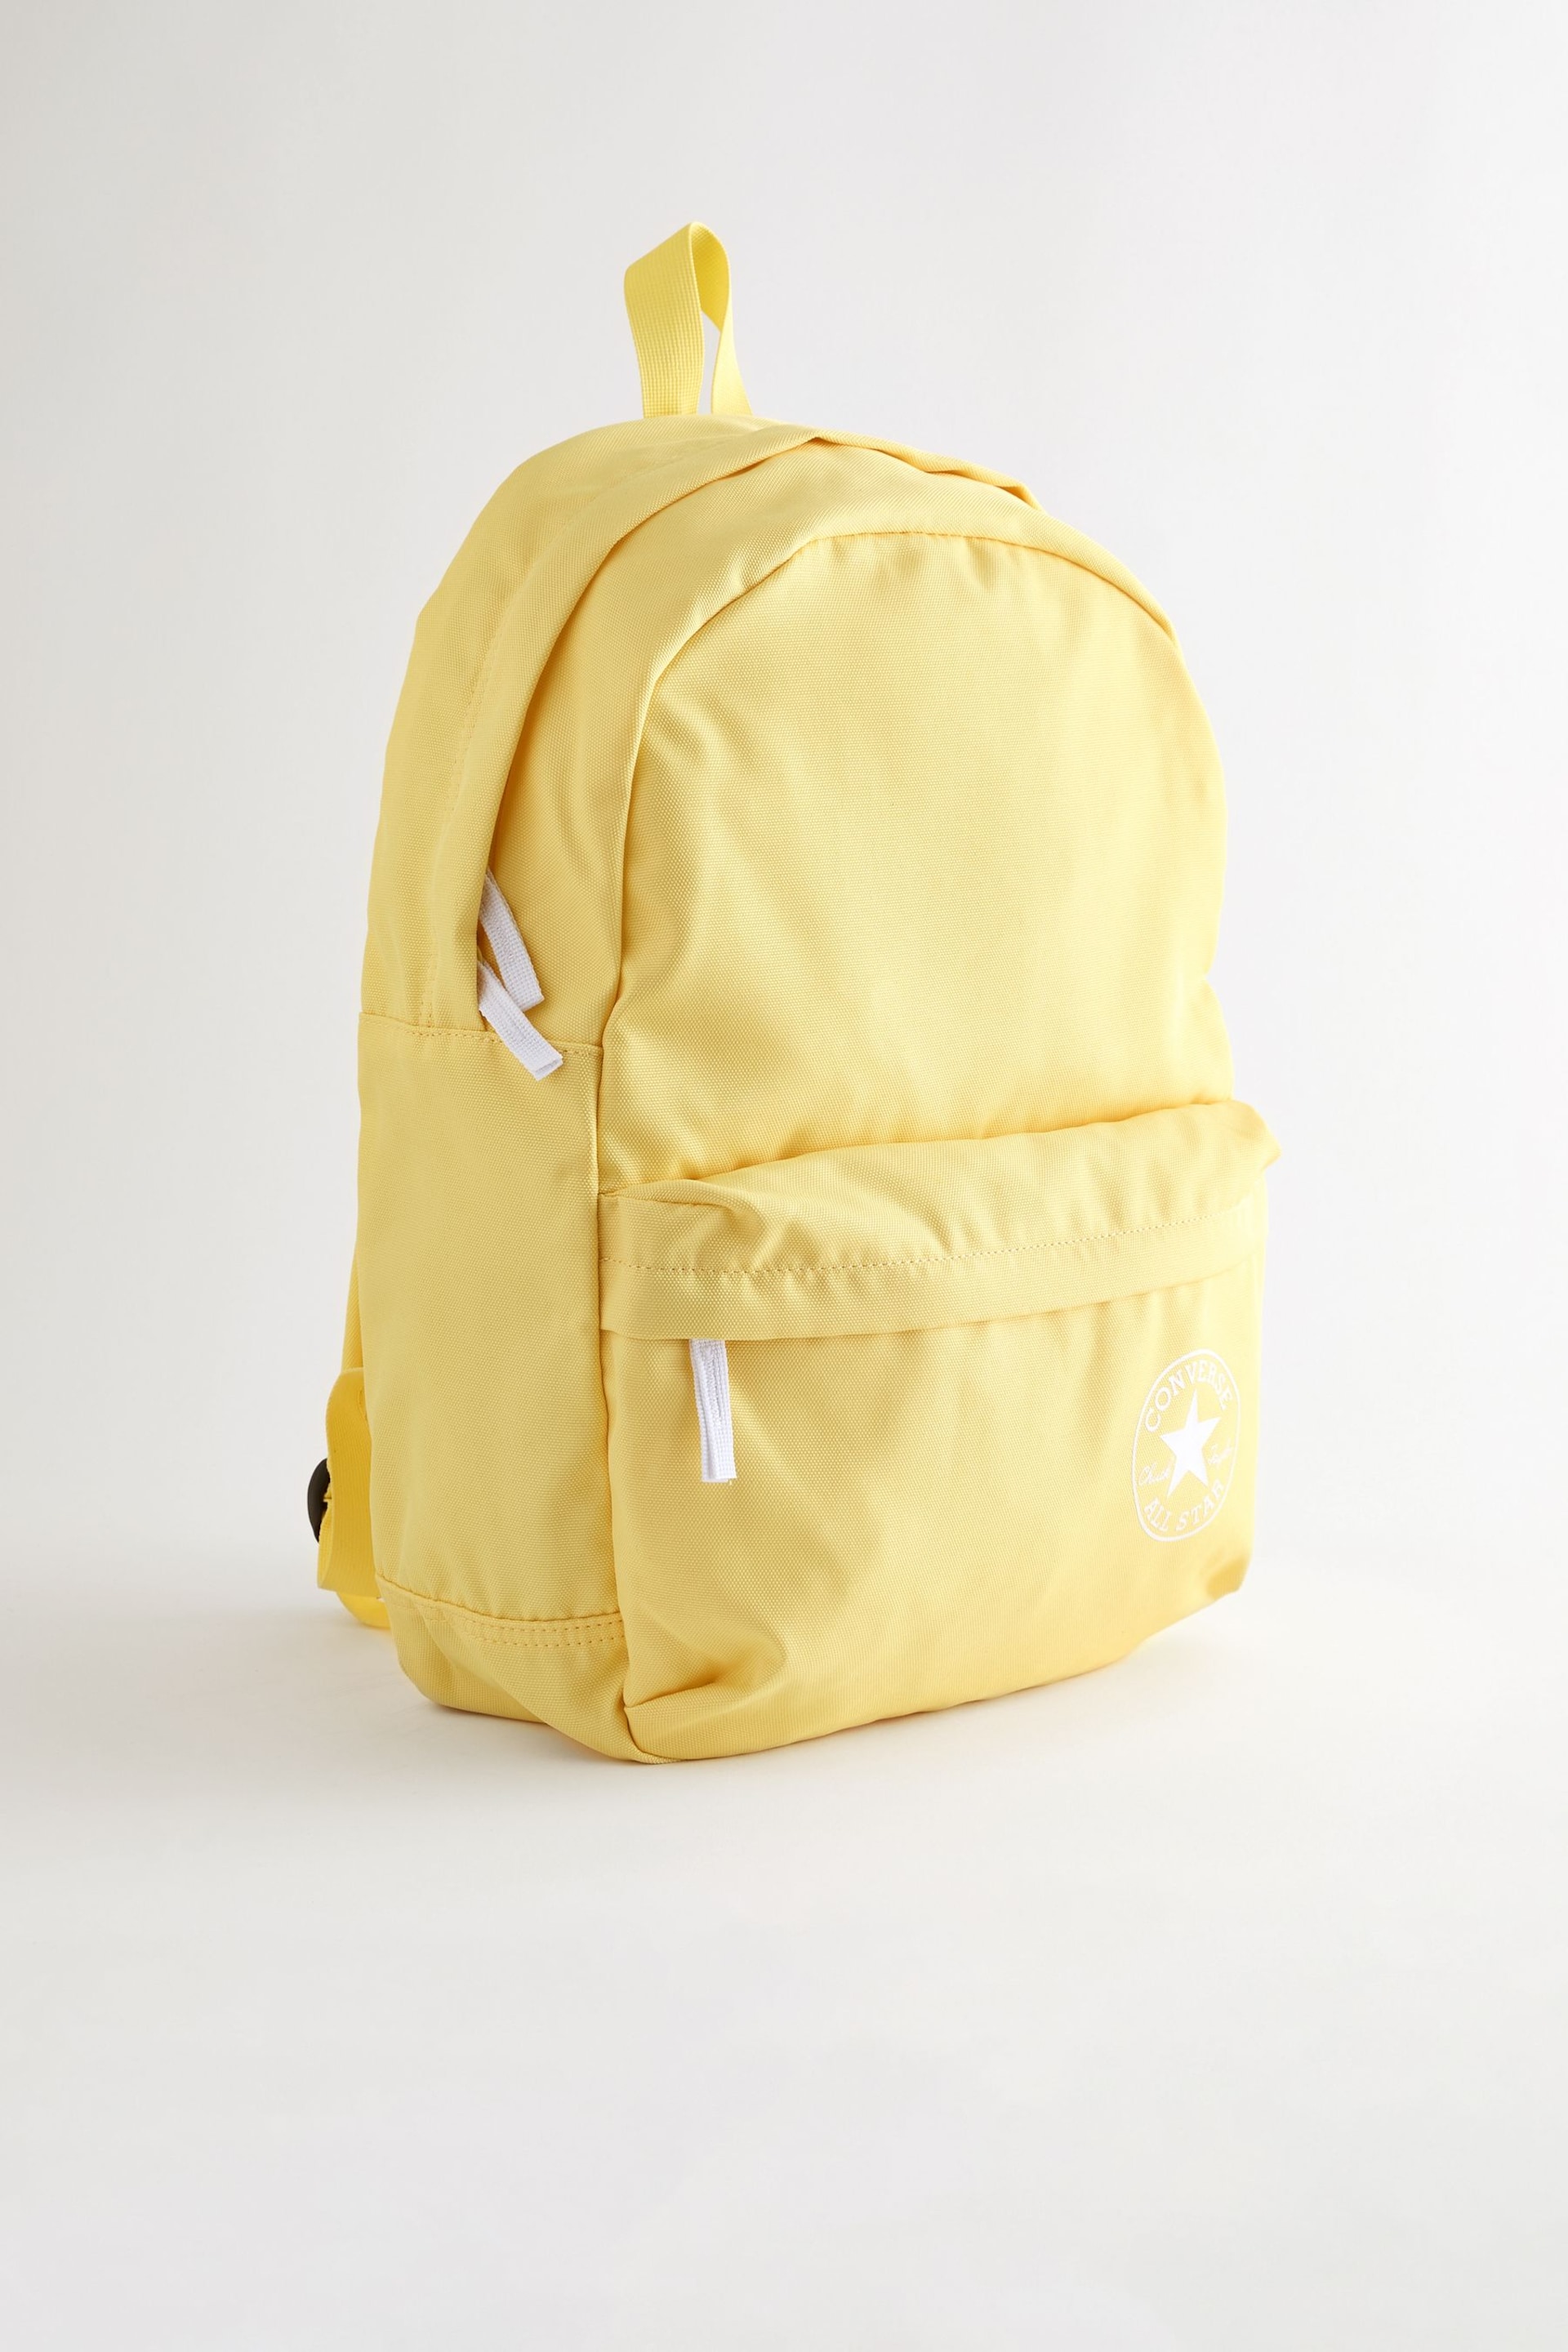 Converse Yellow Speed 3 Backpack - Image 1 of 5